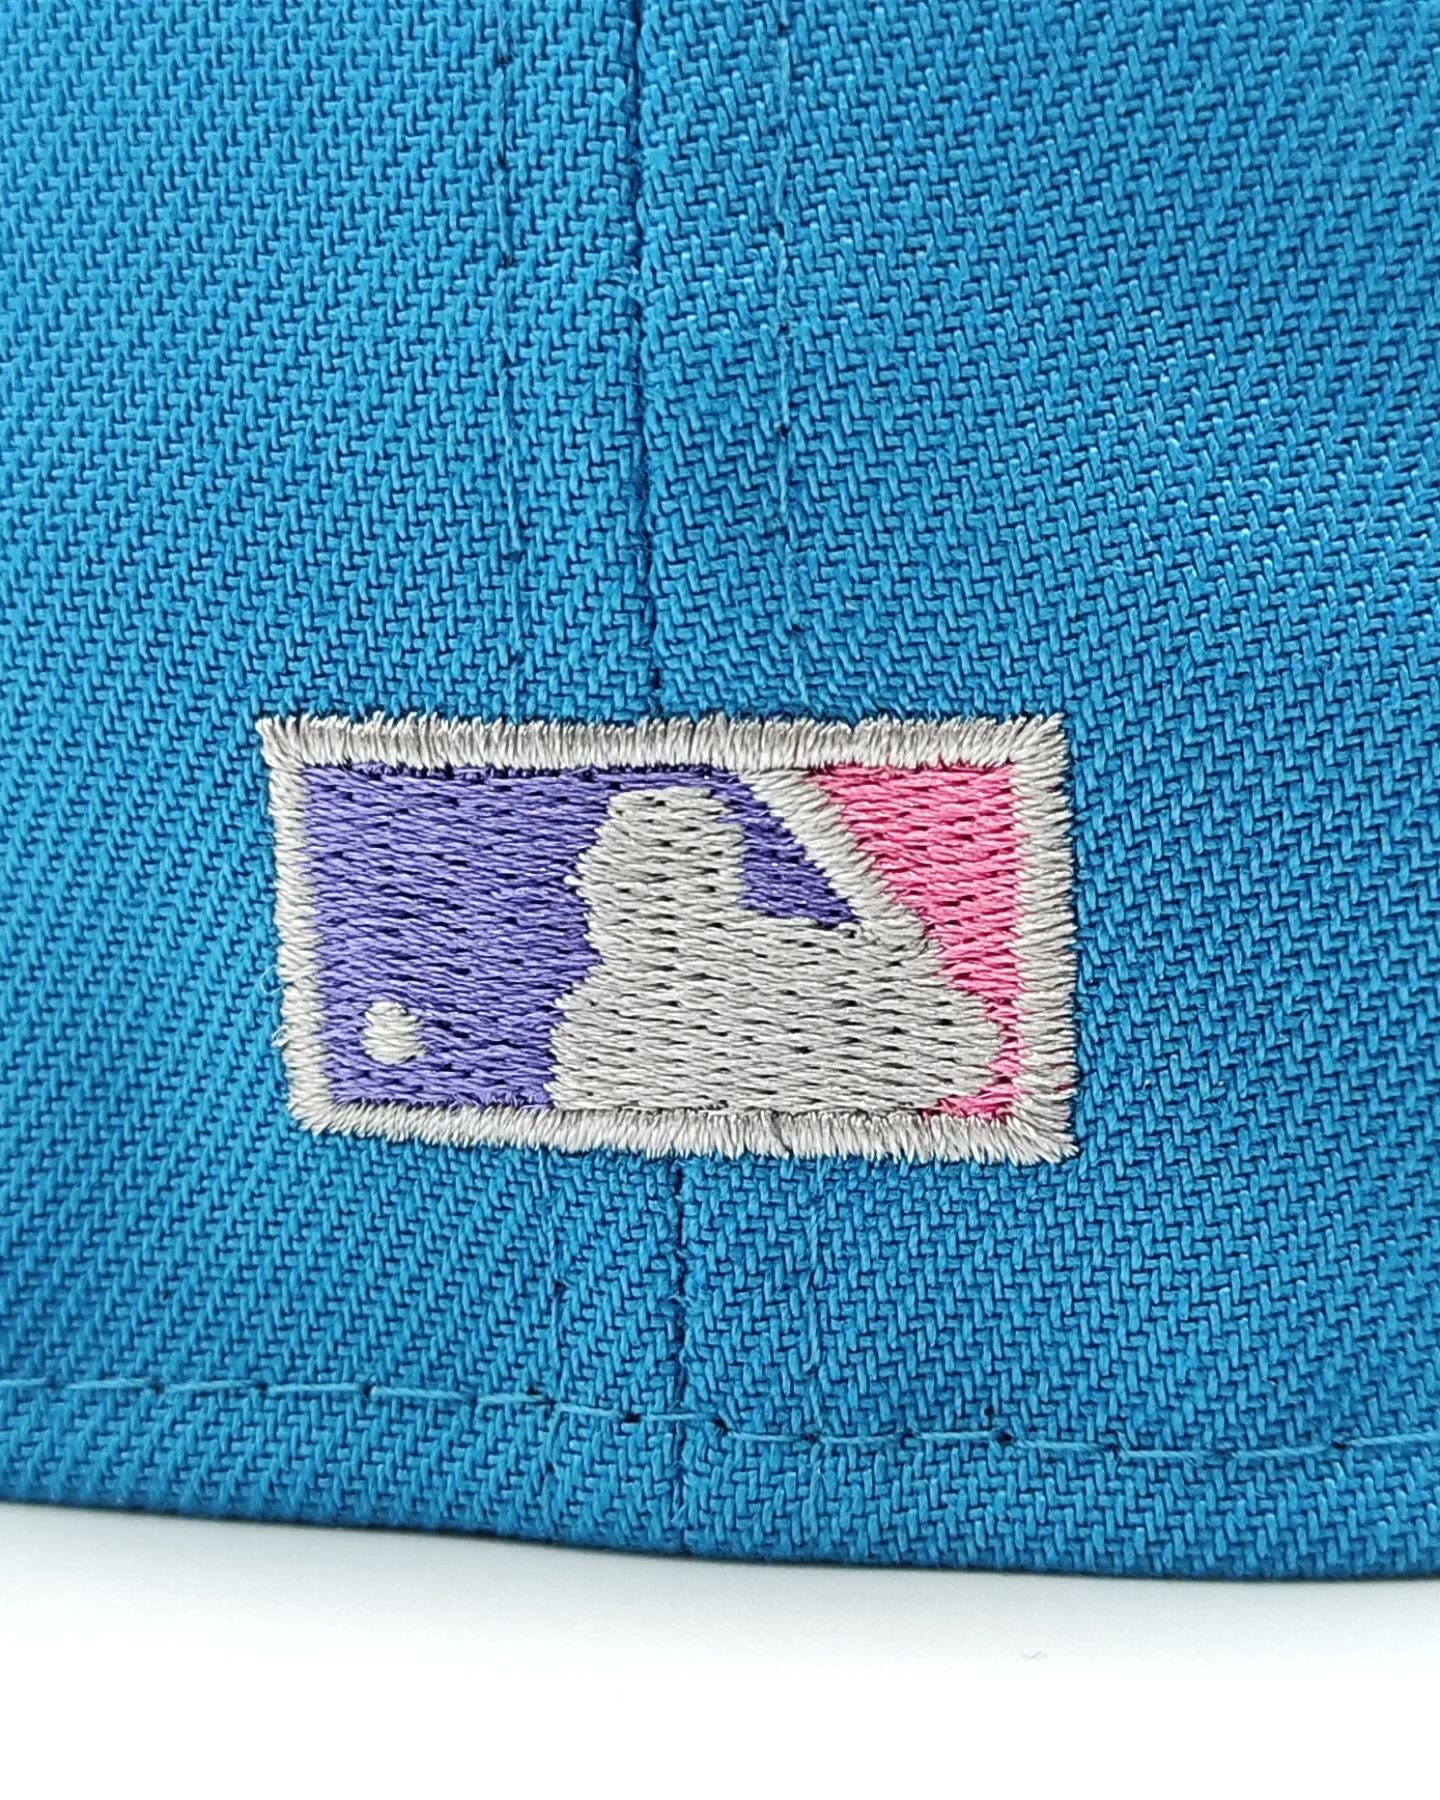 Exclusivo New Era 59Fifty Aux Pack Solo Pittsburgh Pirates 2006 All Star Game Patch Hat - Azul claro, naranja, rosa